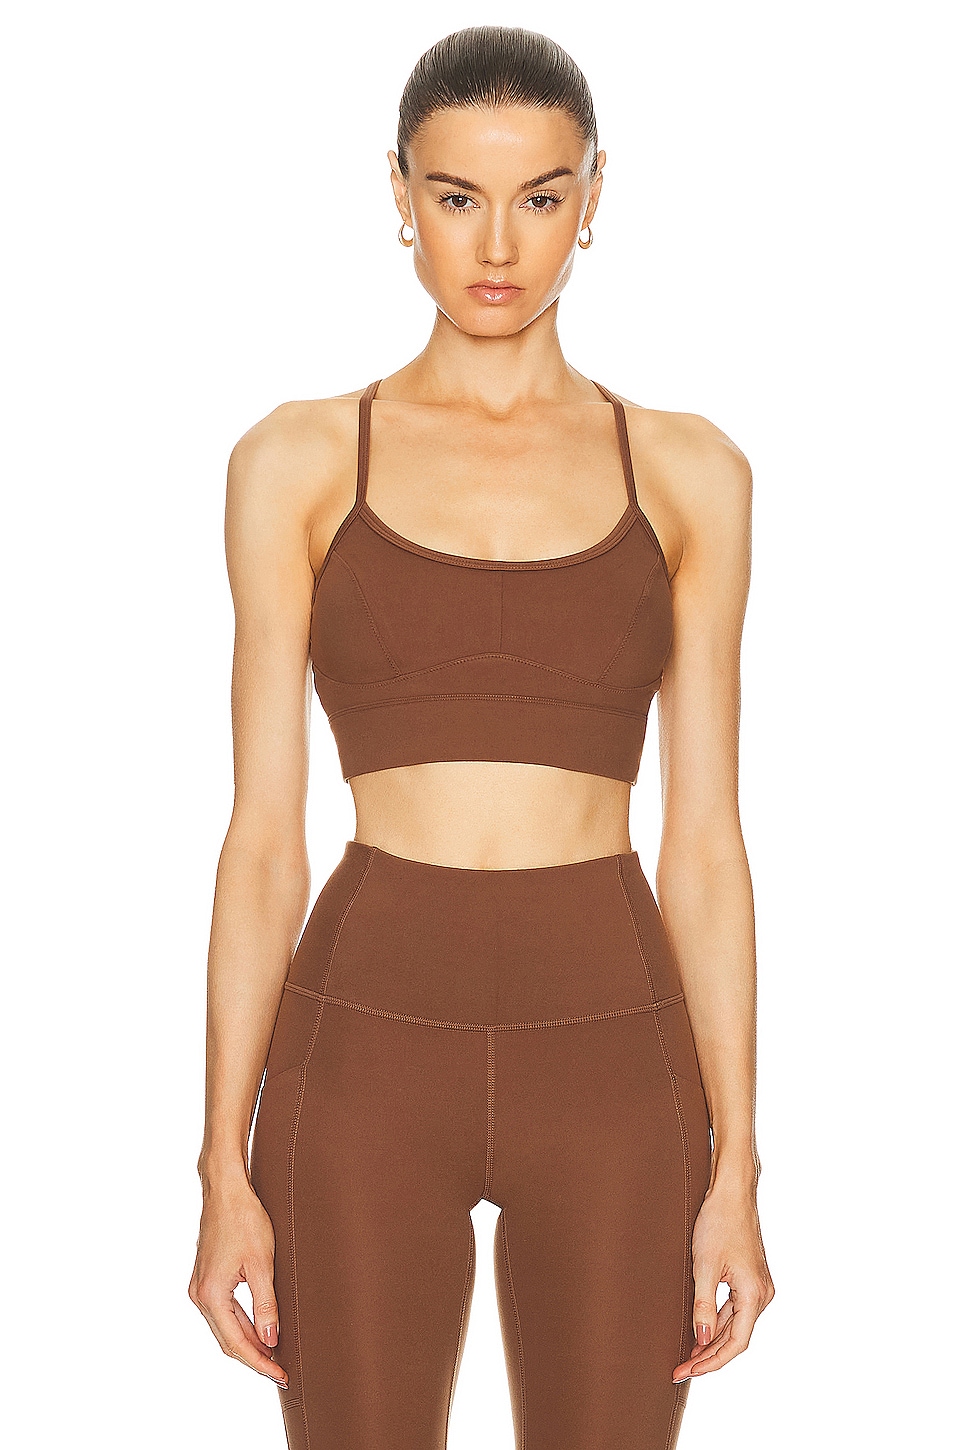 Image 1 of Varley Lets Move Irena Bra in Cocoa Brown